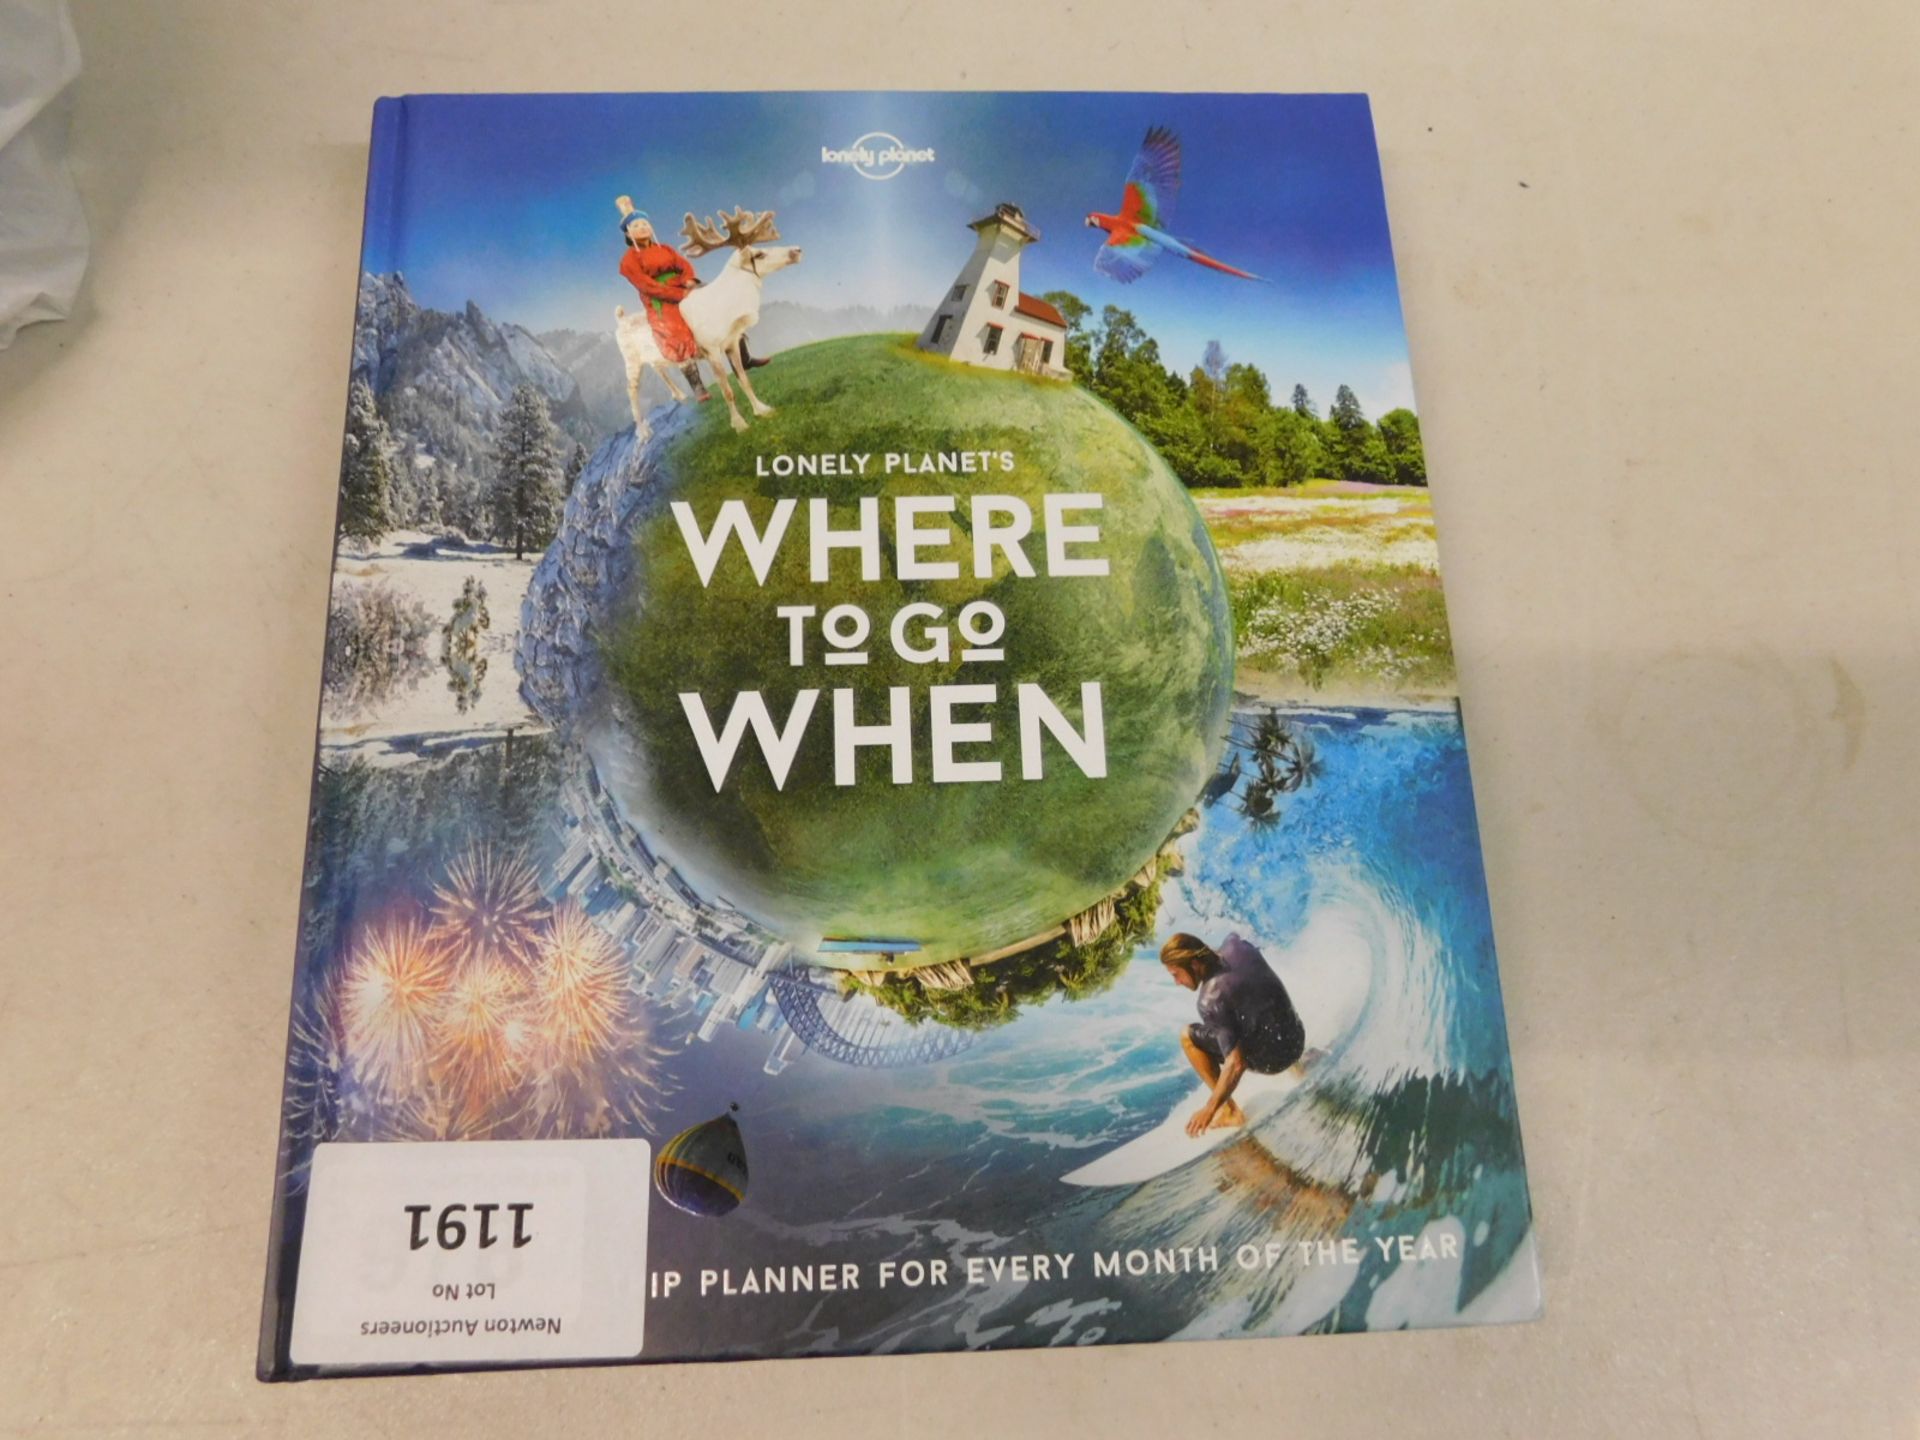 1 LONELY PLANET'S WHERE TO GO WHEN BOOK RRP £19.99